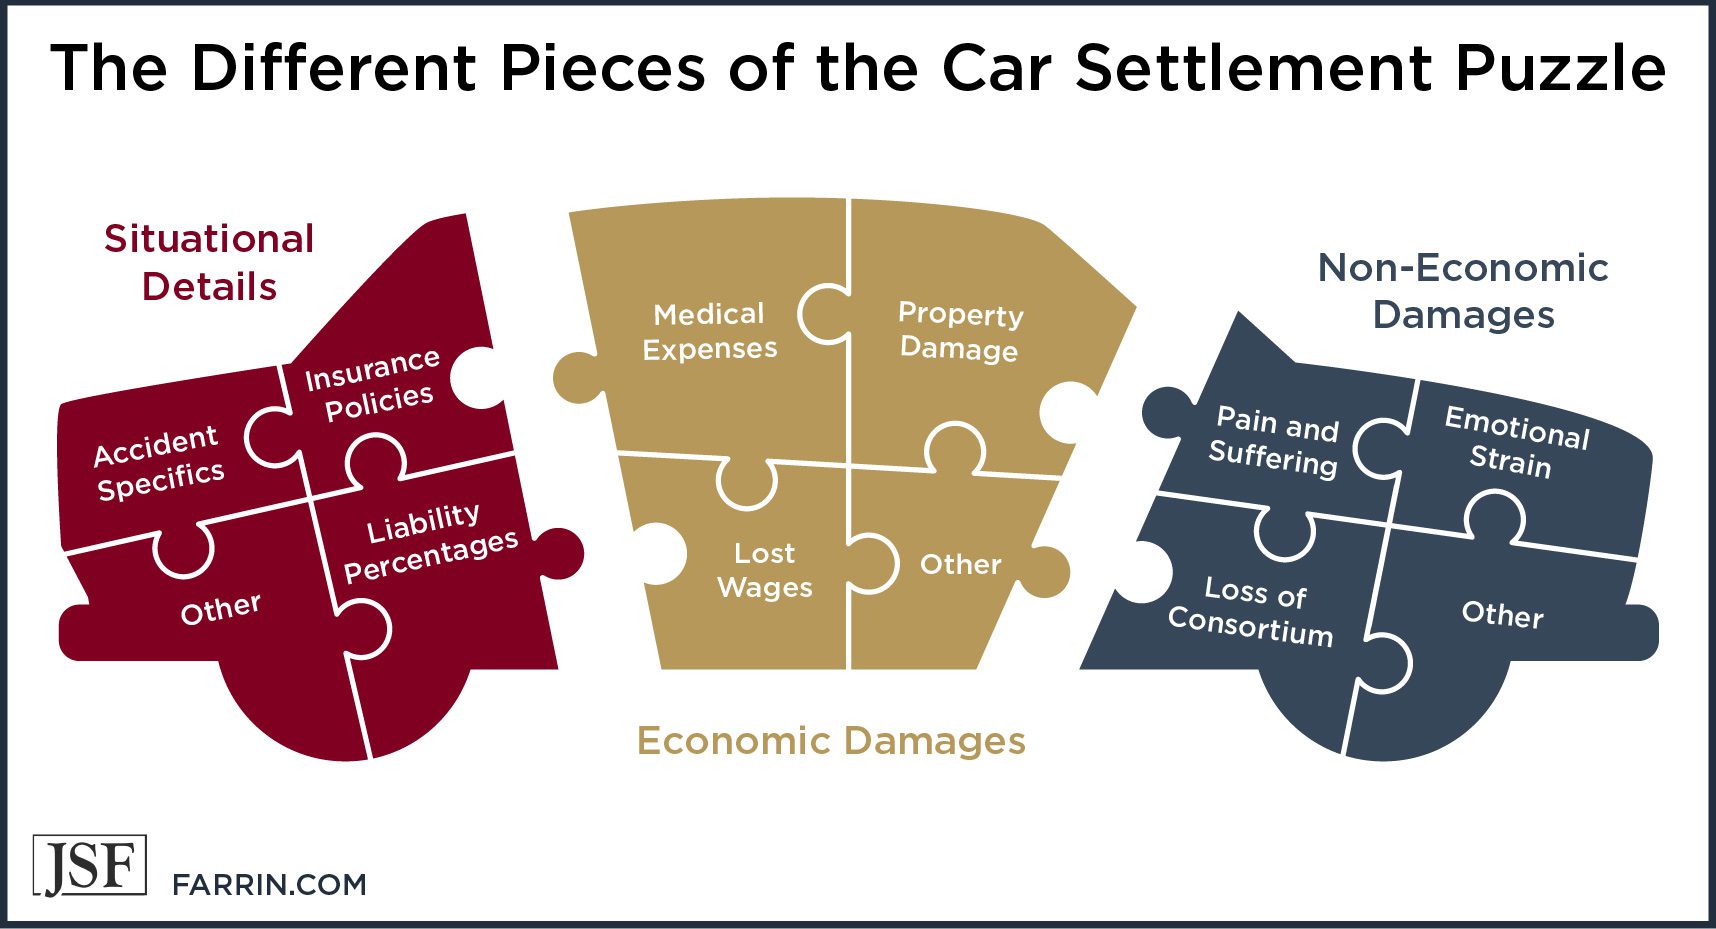 A car-shaped puzzle with pieces representing settlement details and damages.